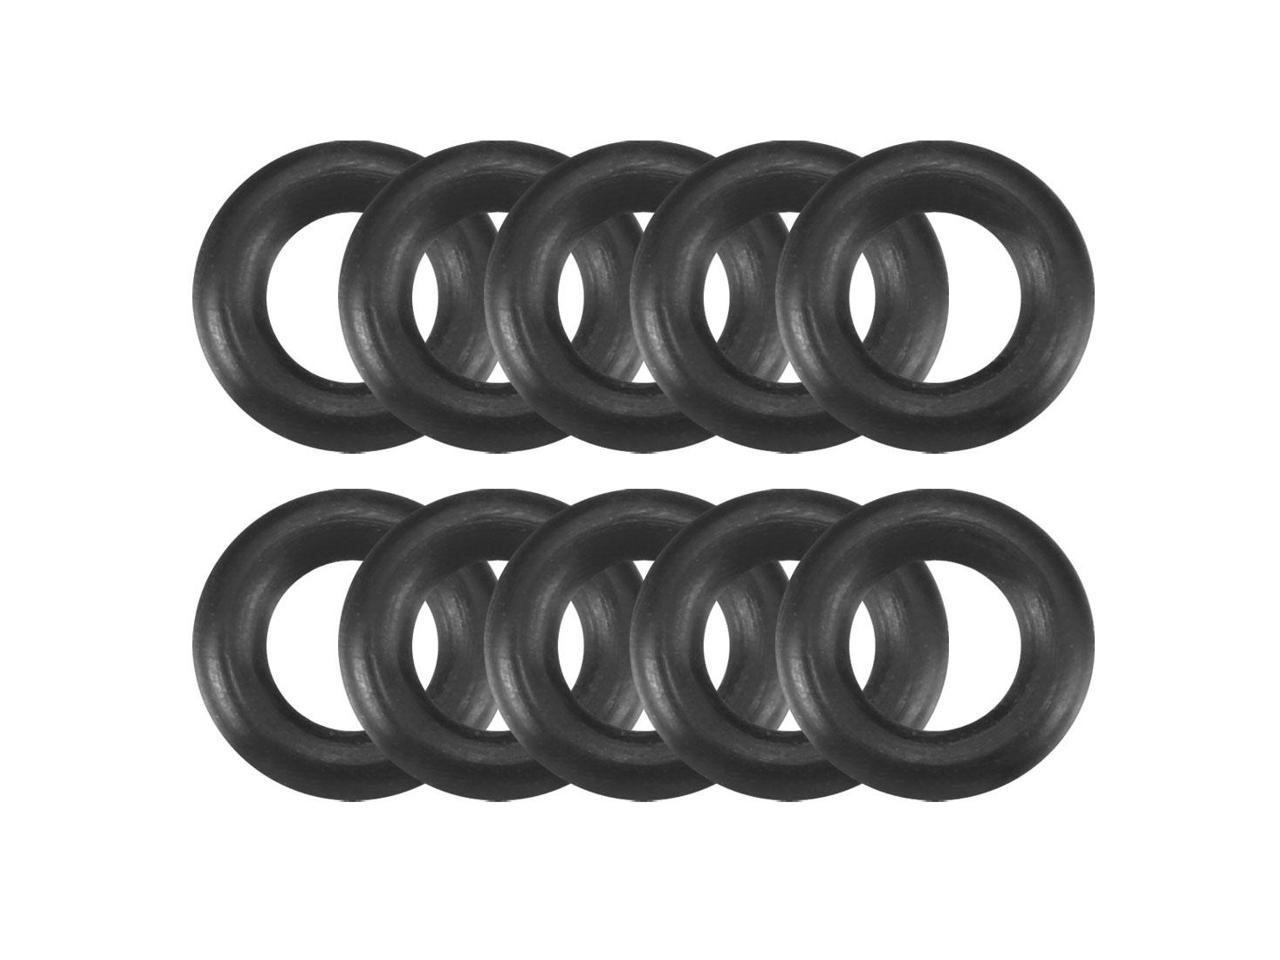 REPLACEMENT O RINGS SEALS FOR WINDSURFER AIR SCREW WASHERS 10mm & 5mm 